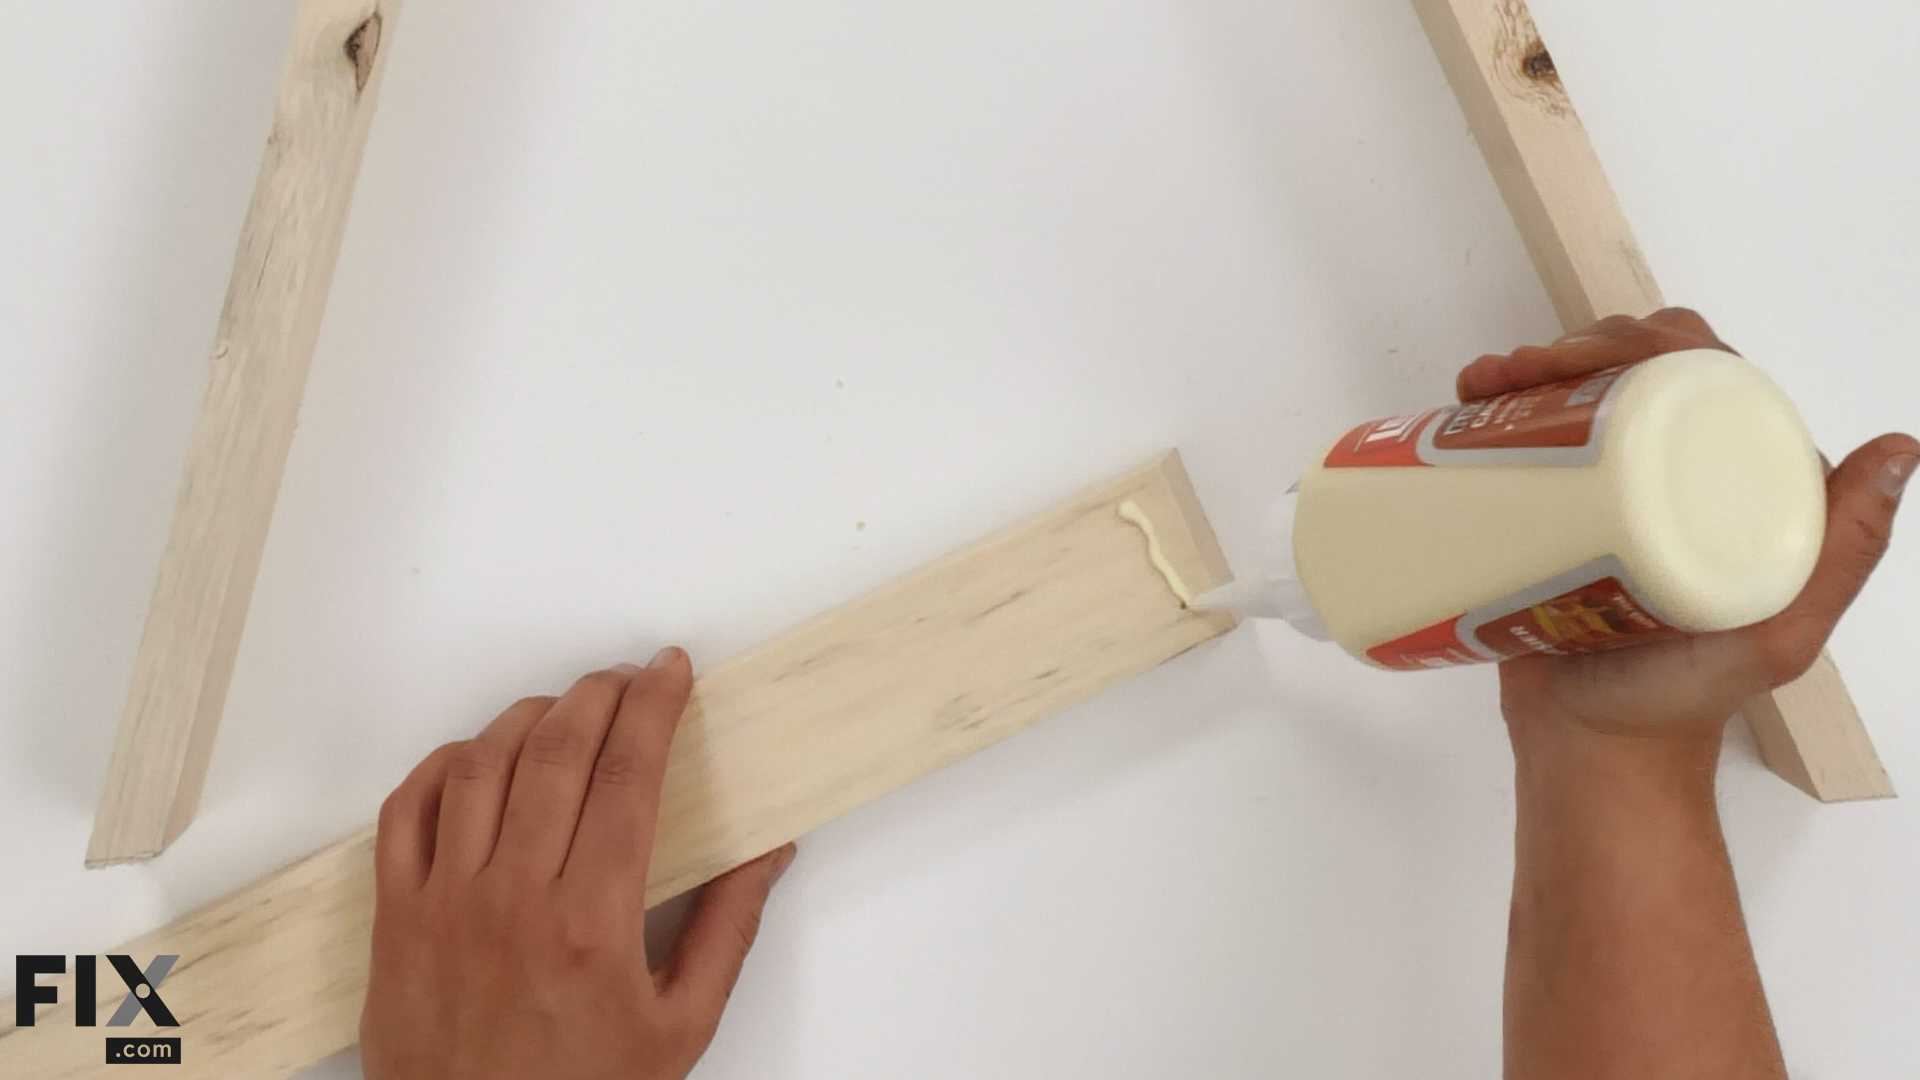 Apply Wood Glue to Joints to Build a Bulb Christmas Tree Frame